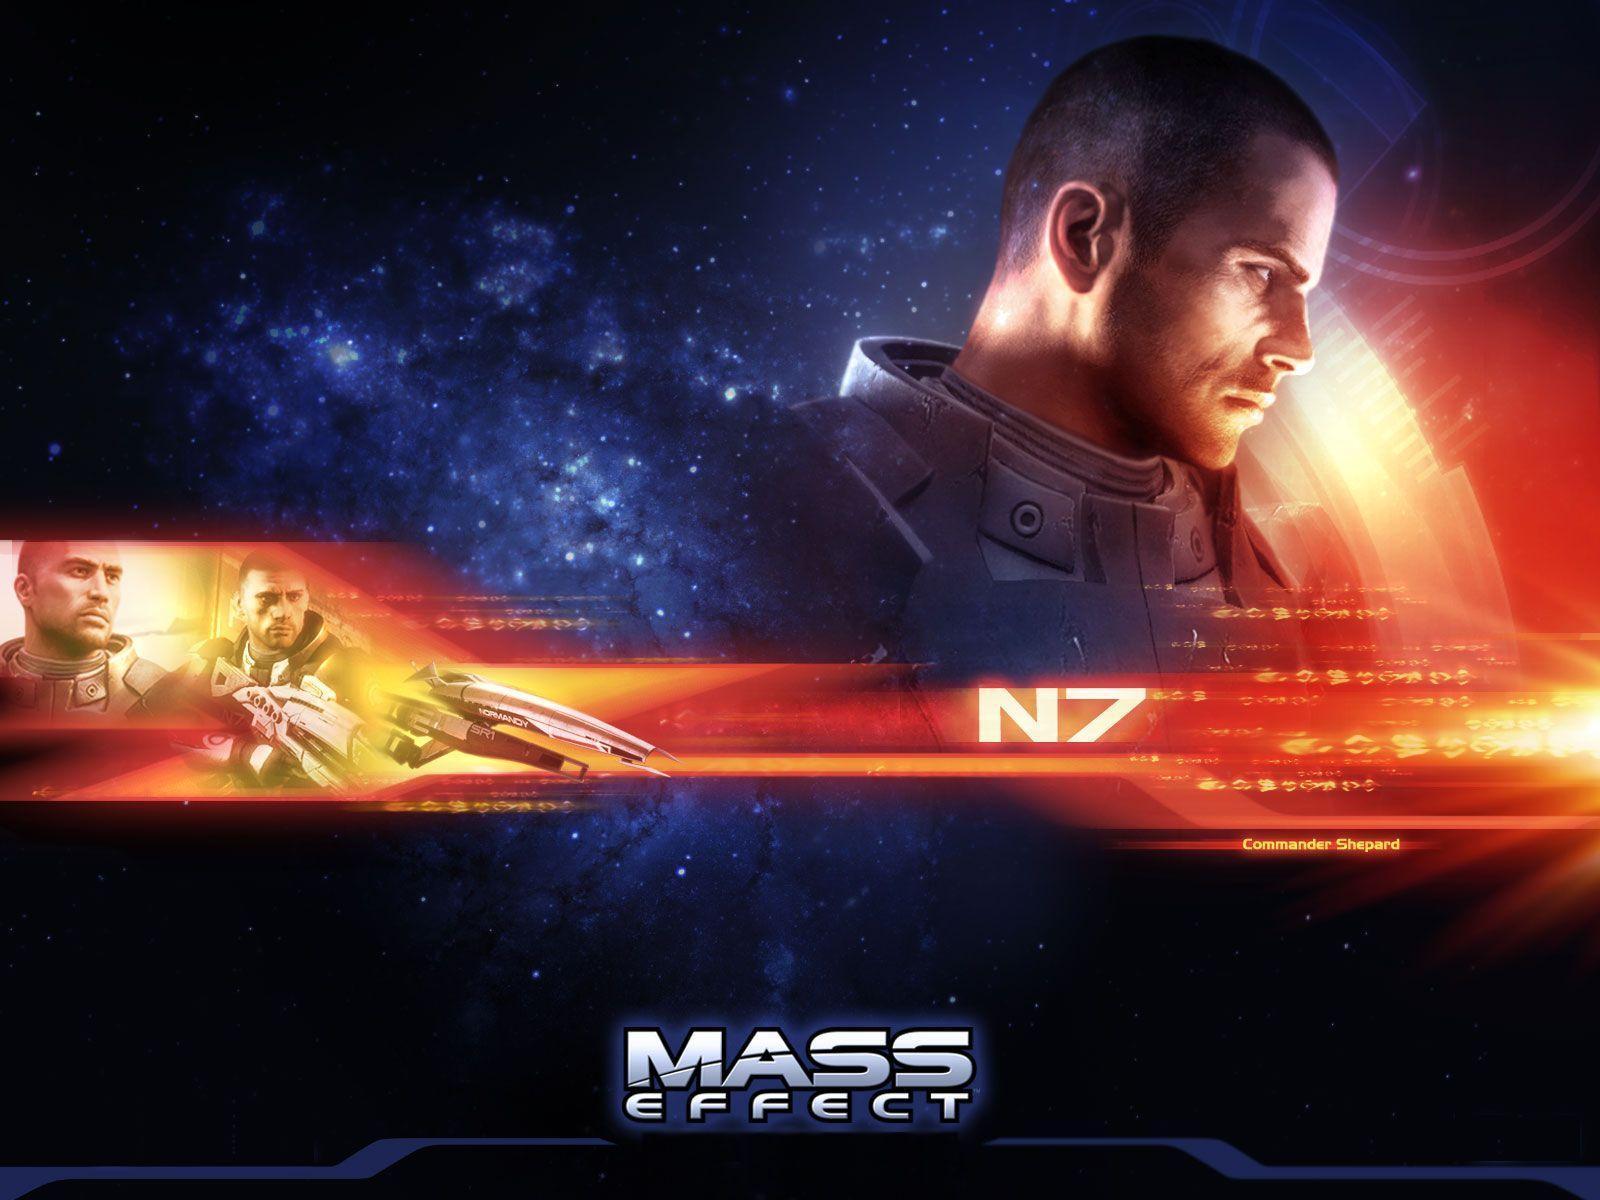 In Mass Effect 1 And 2 Wallpaper. PicsWallpaper